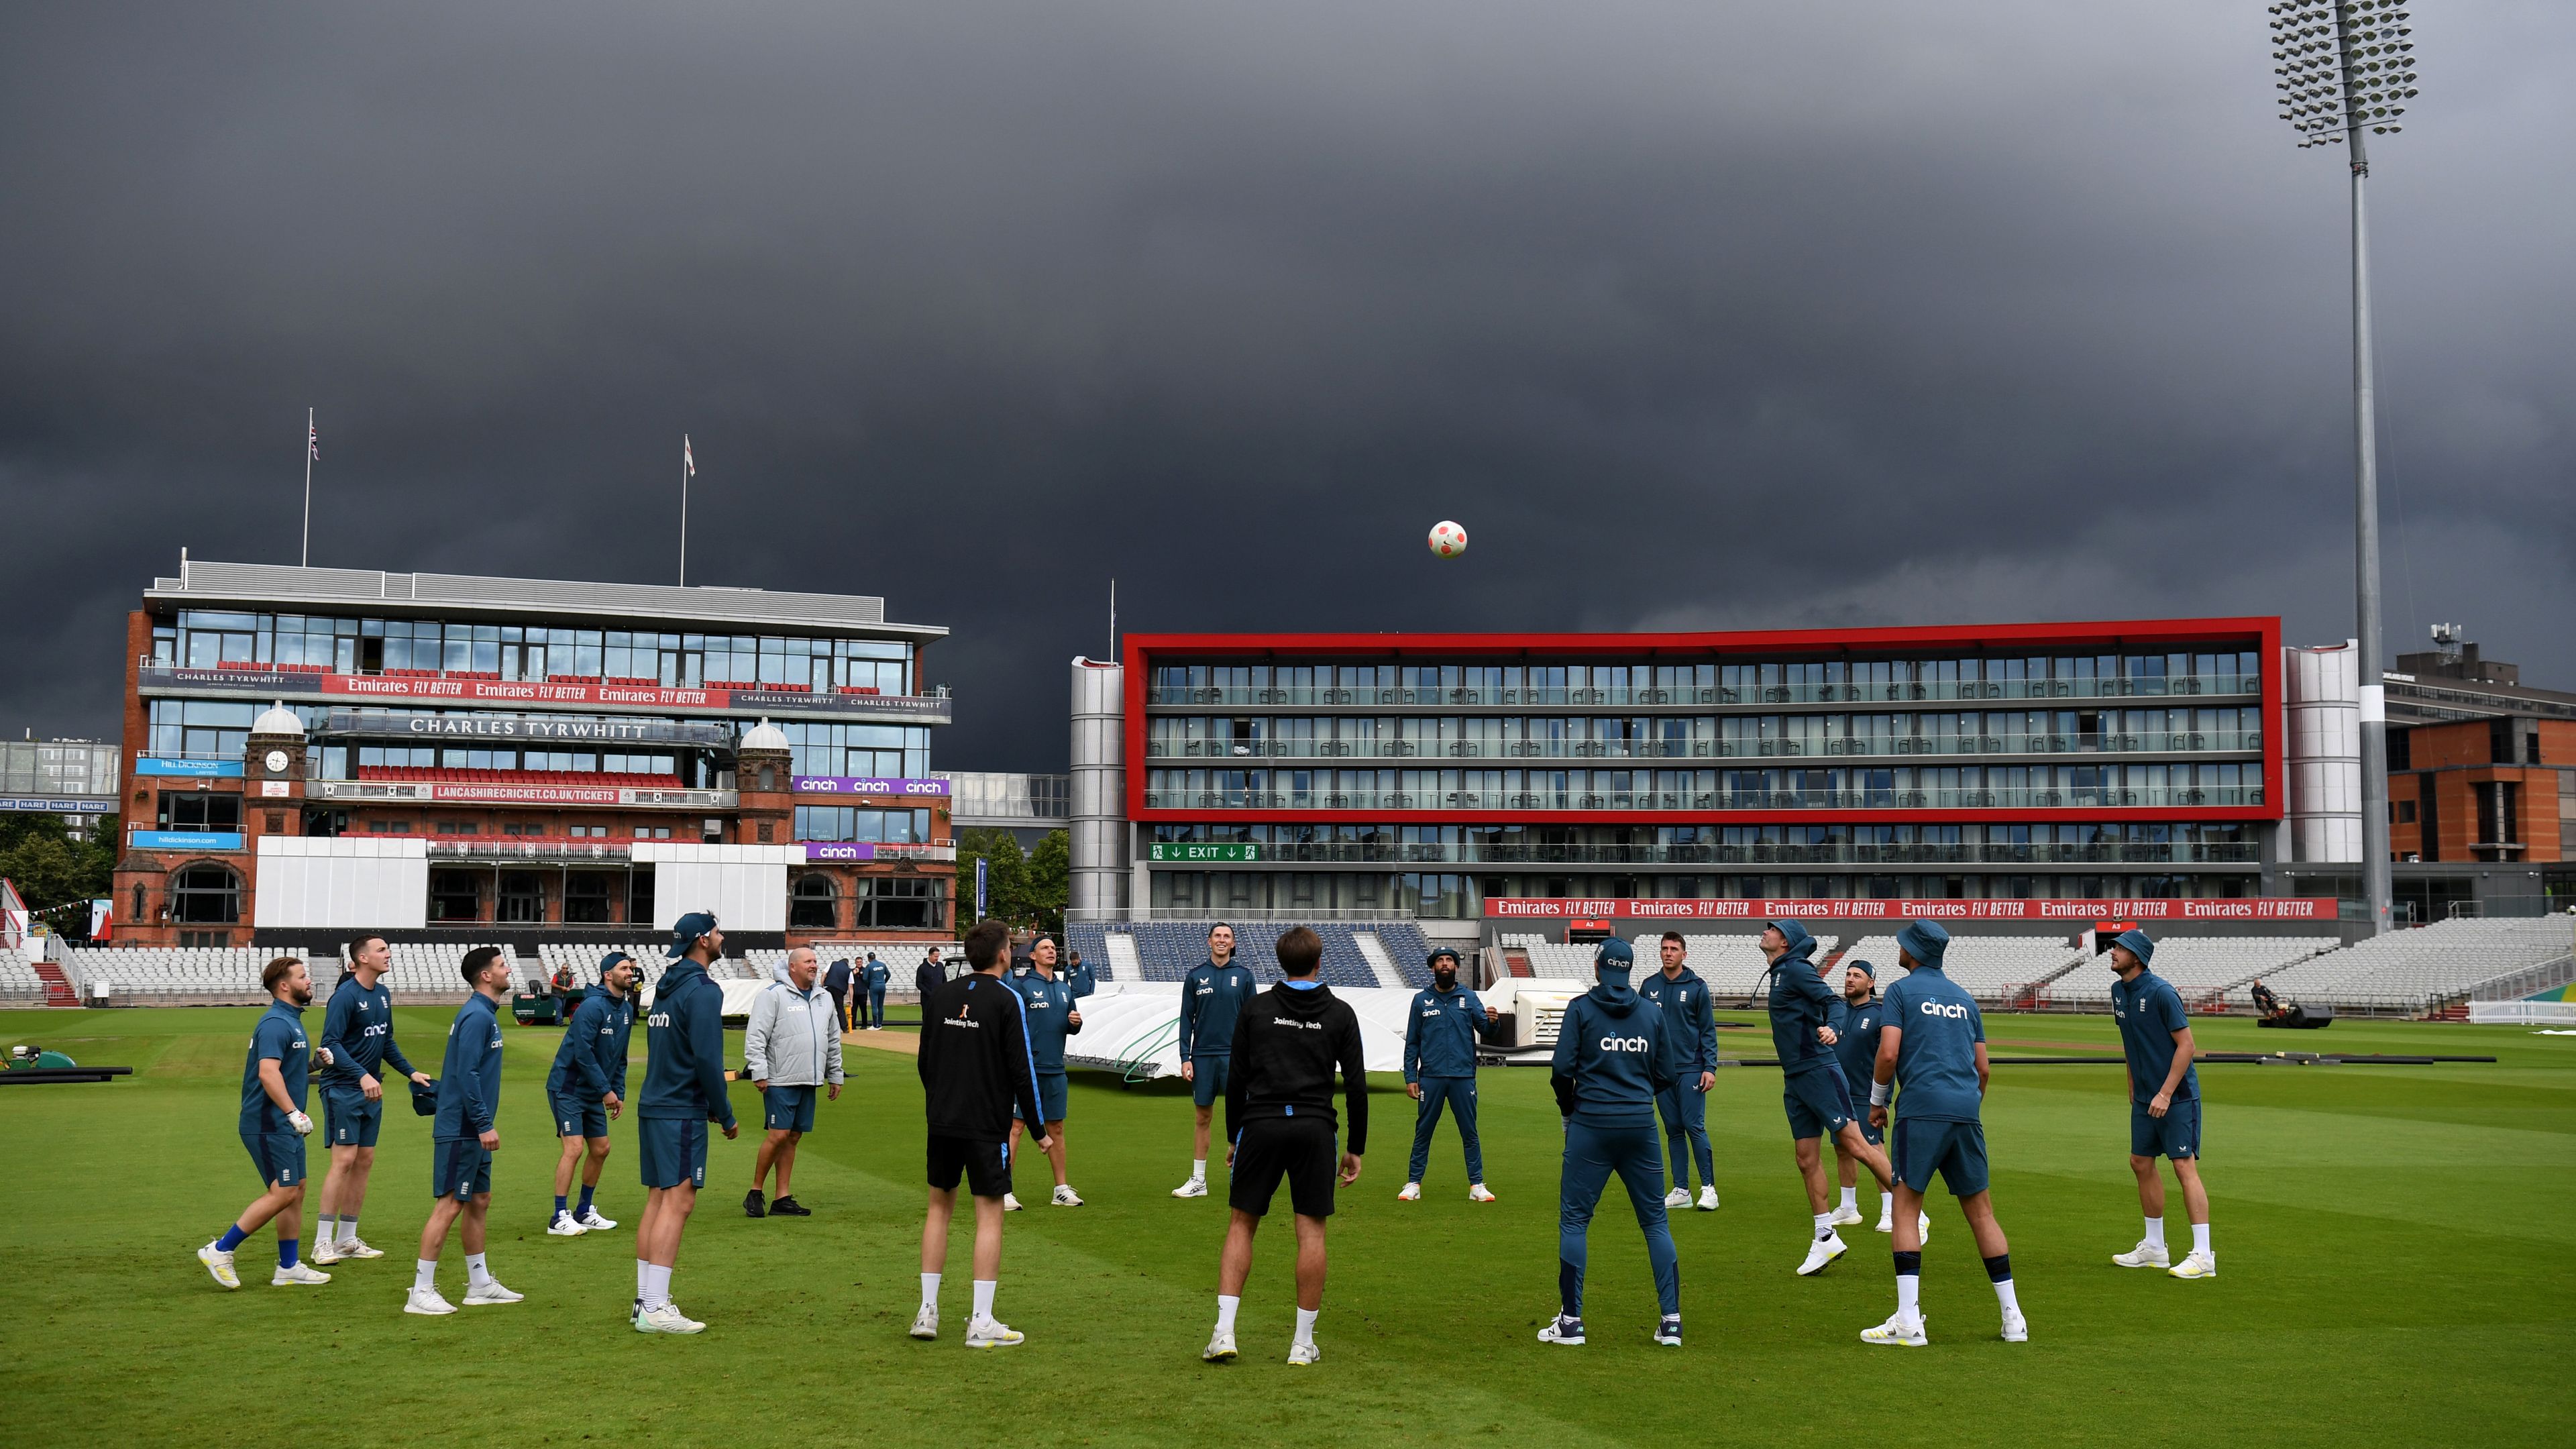 England warm up ahead of a nets session at Emirates Old Trafford on July 17, 2023 in Manchester, England. (Photo by Gareth Copley/Getty Images)